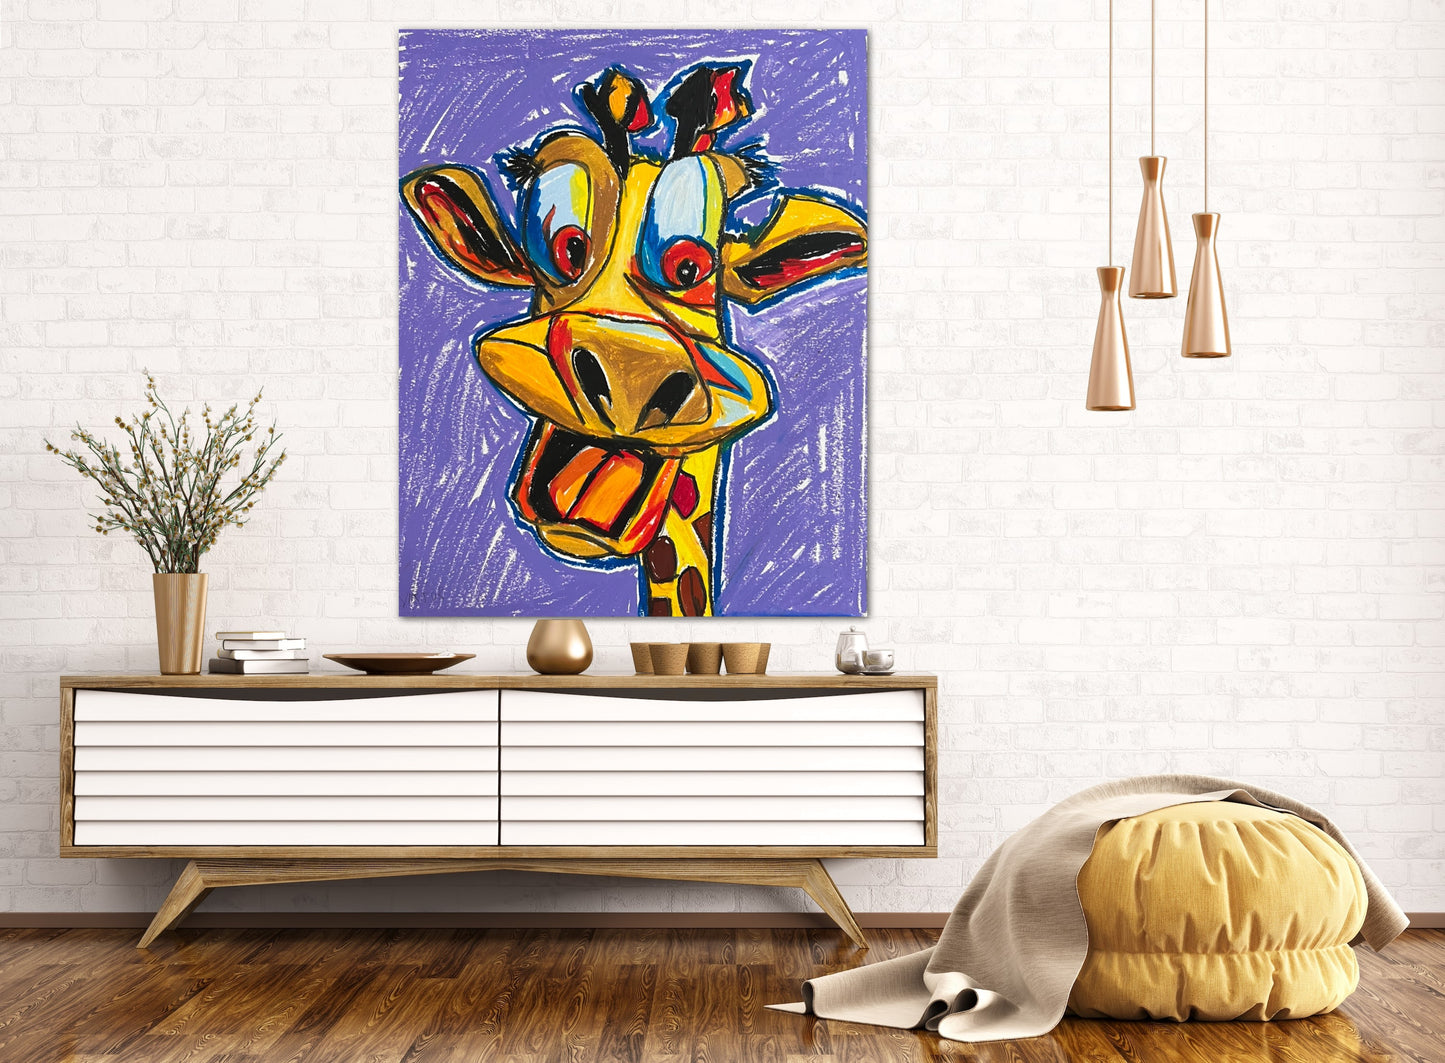 Sophie The Silly Giraffe - fine prints and canvas prints in more size